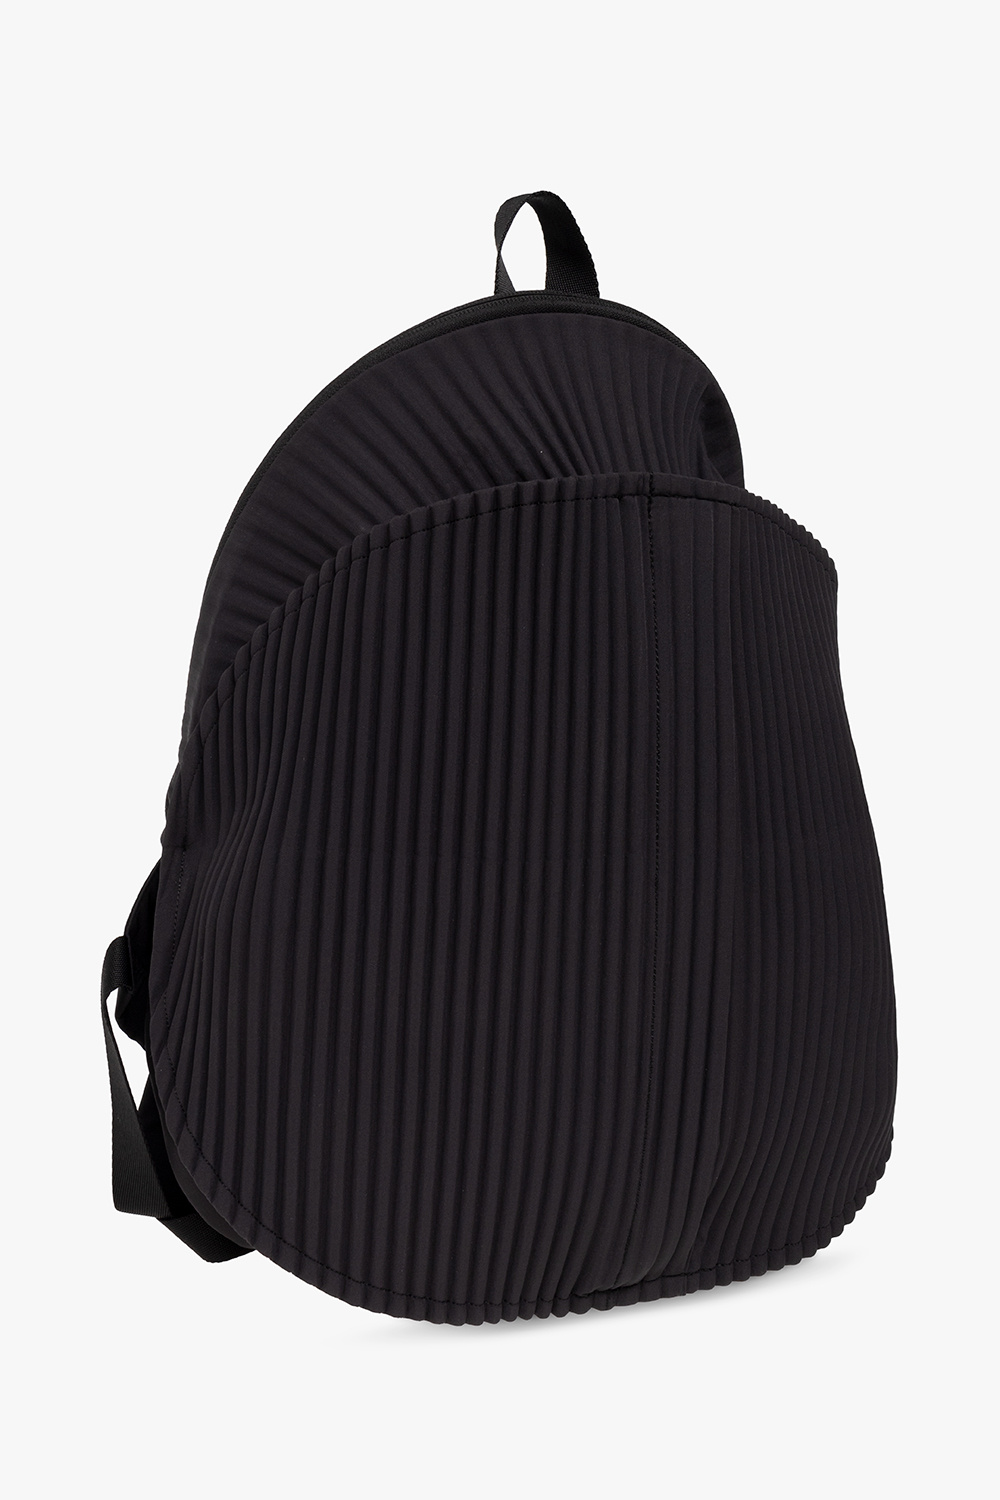 yellow woven market tote Pleated backpack